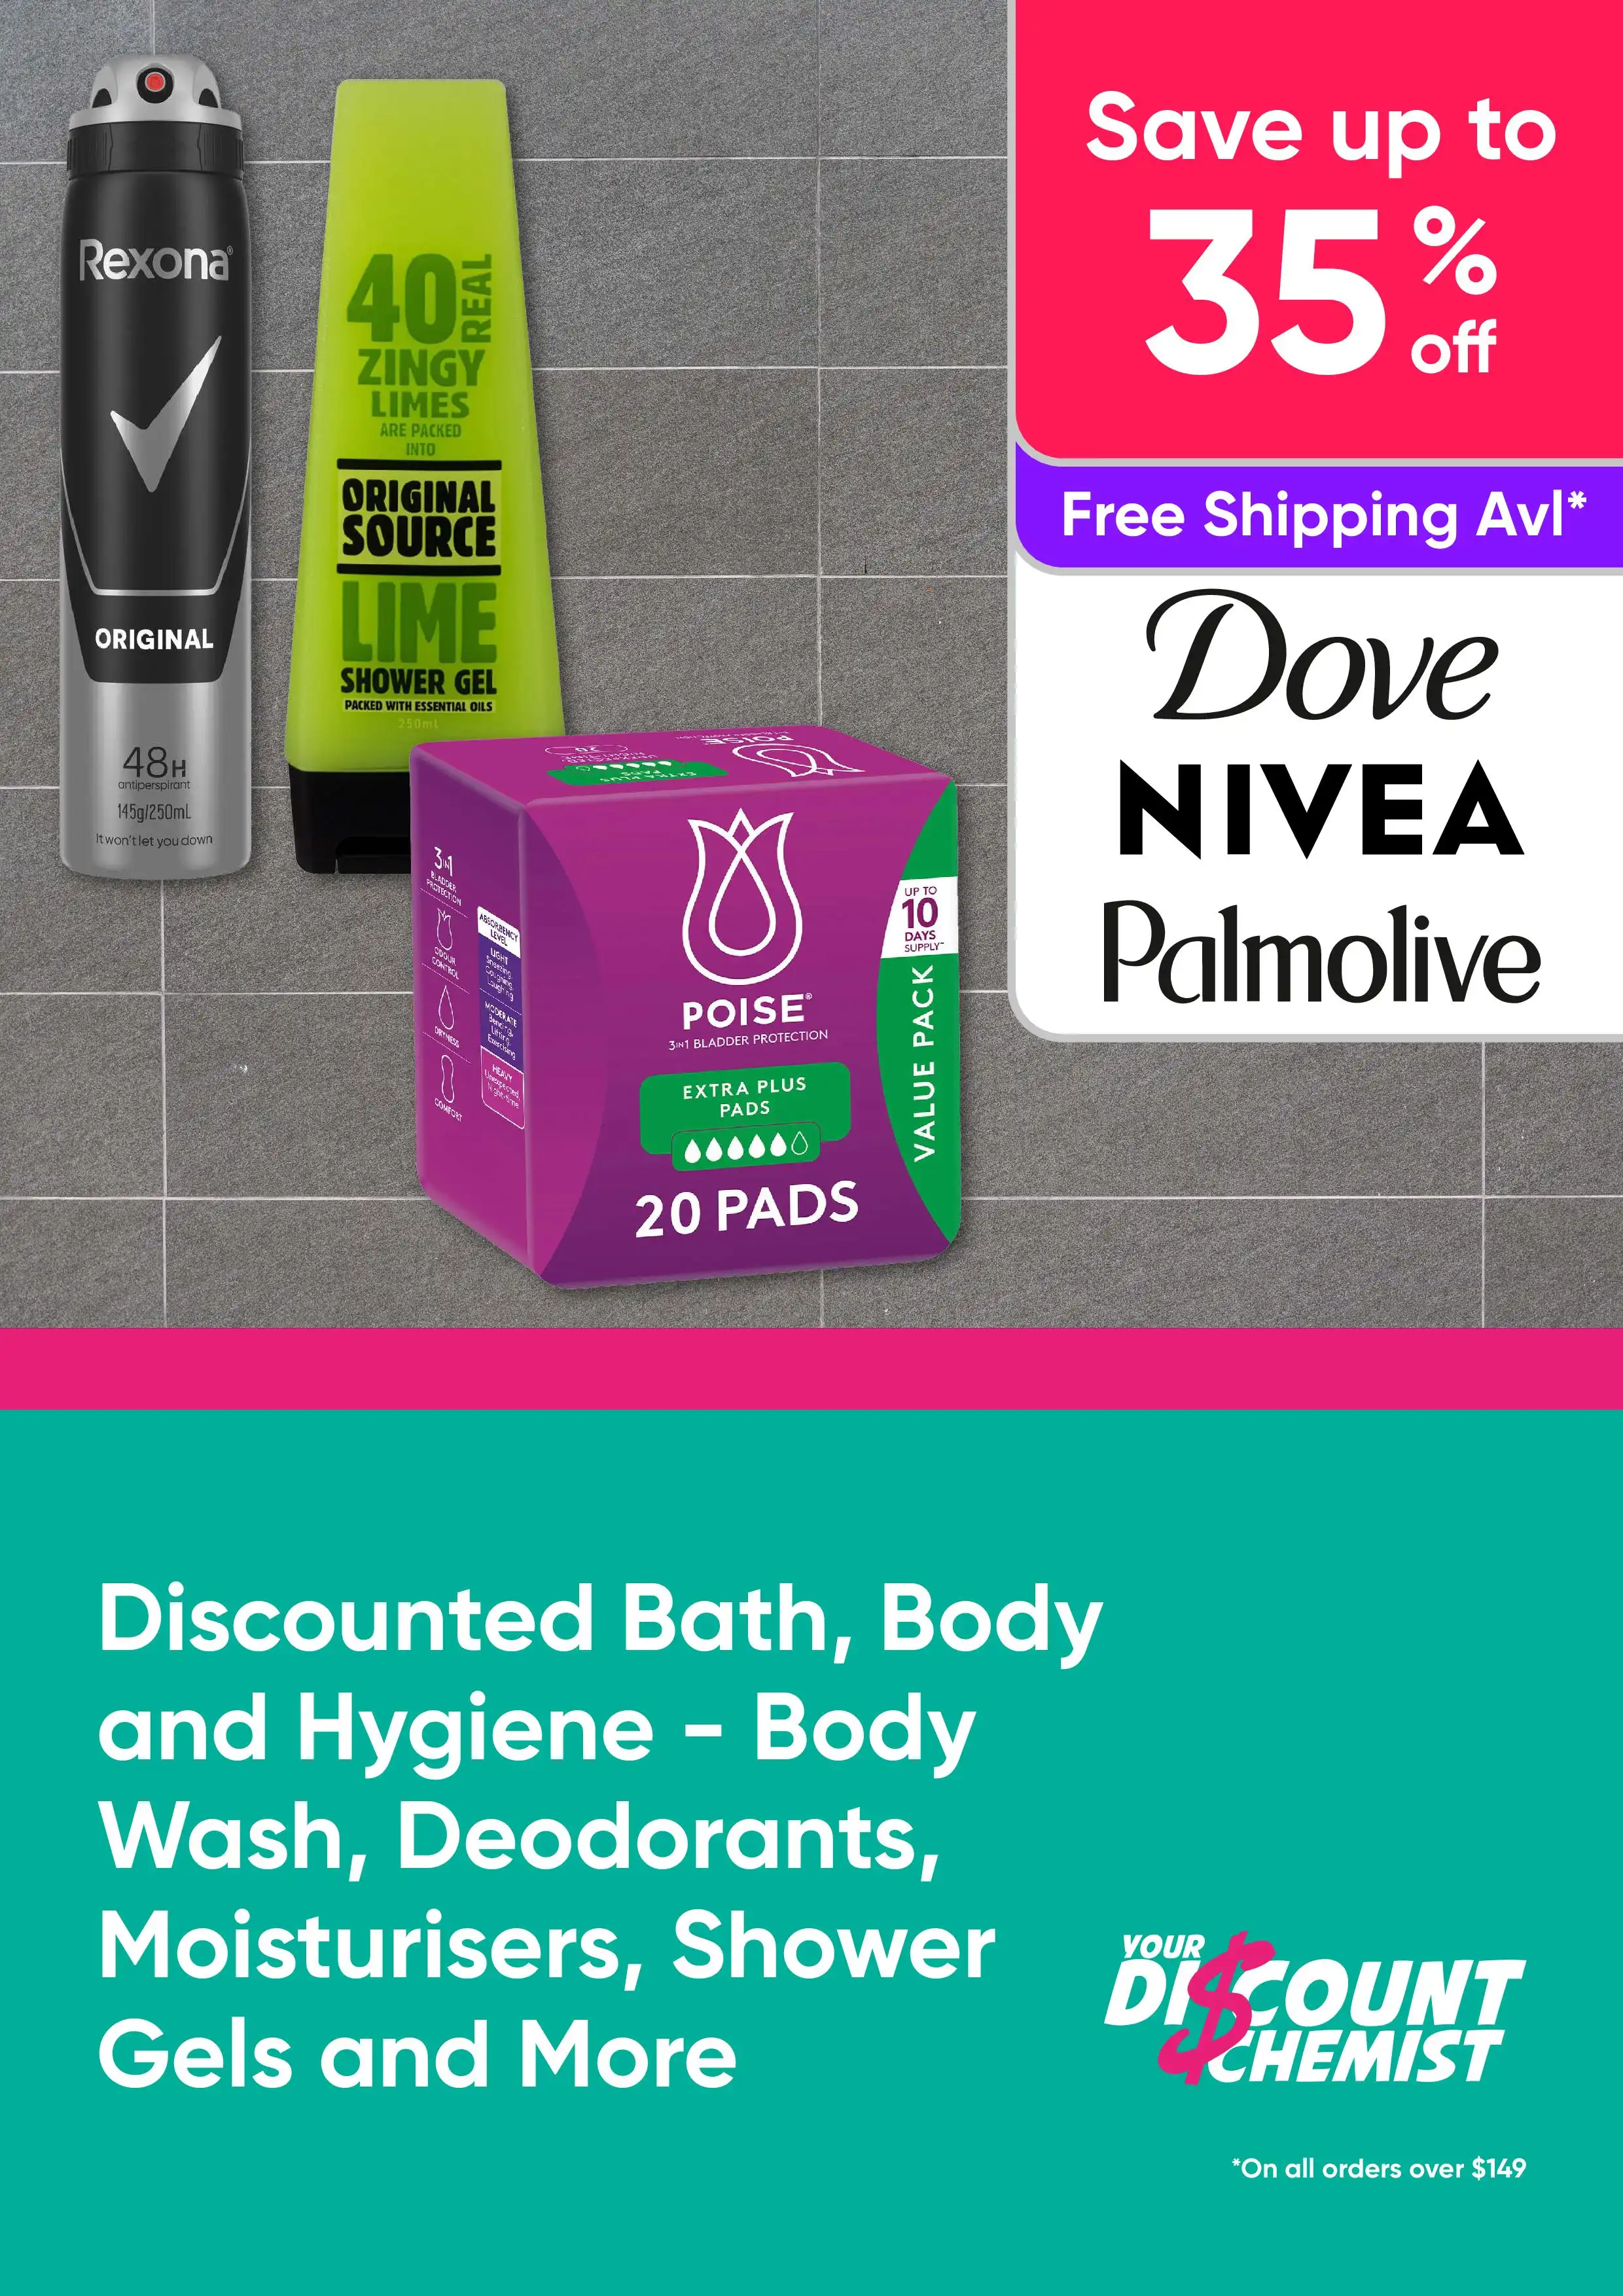 Discounted Bath, Body and Hygiene Up to 35% Off- Shop Body Wash, Deodorants, Shower Gels and More